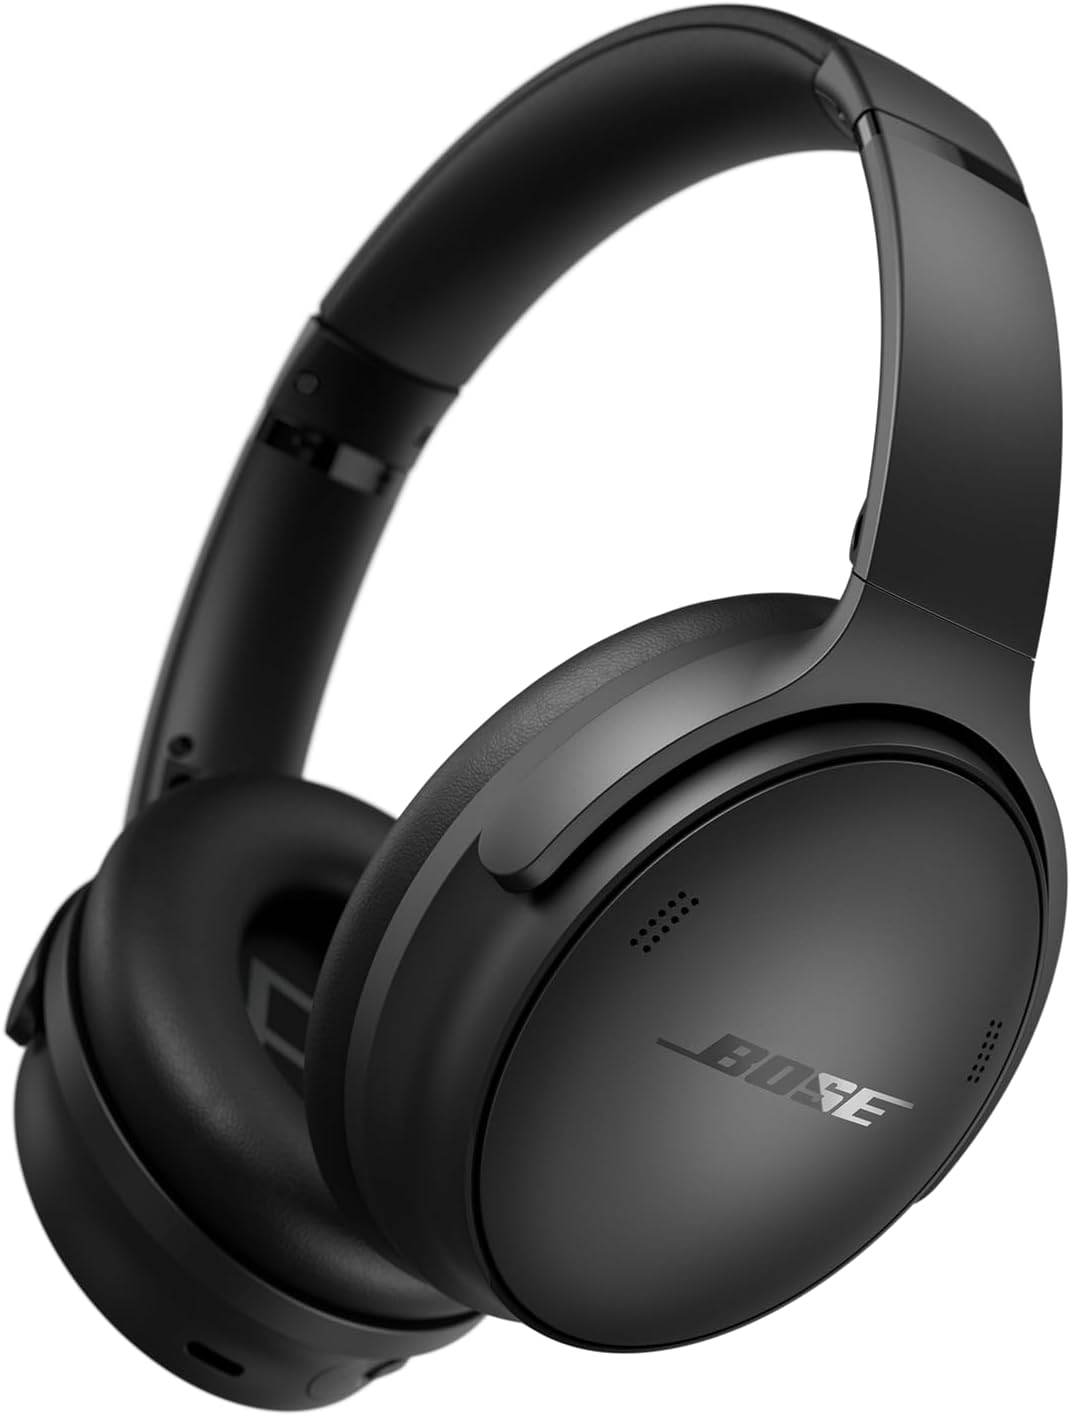 Bose QuietComfort Wireless Noise Cancelling Headphones On Sale for $100 Off [Deal]